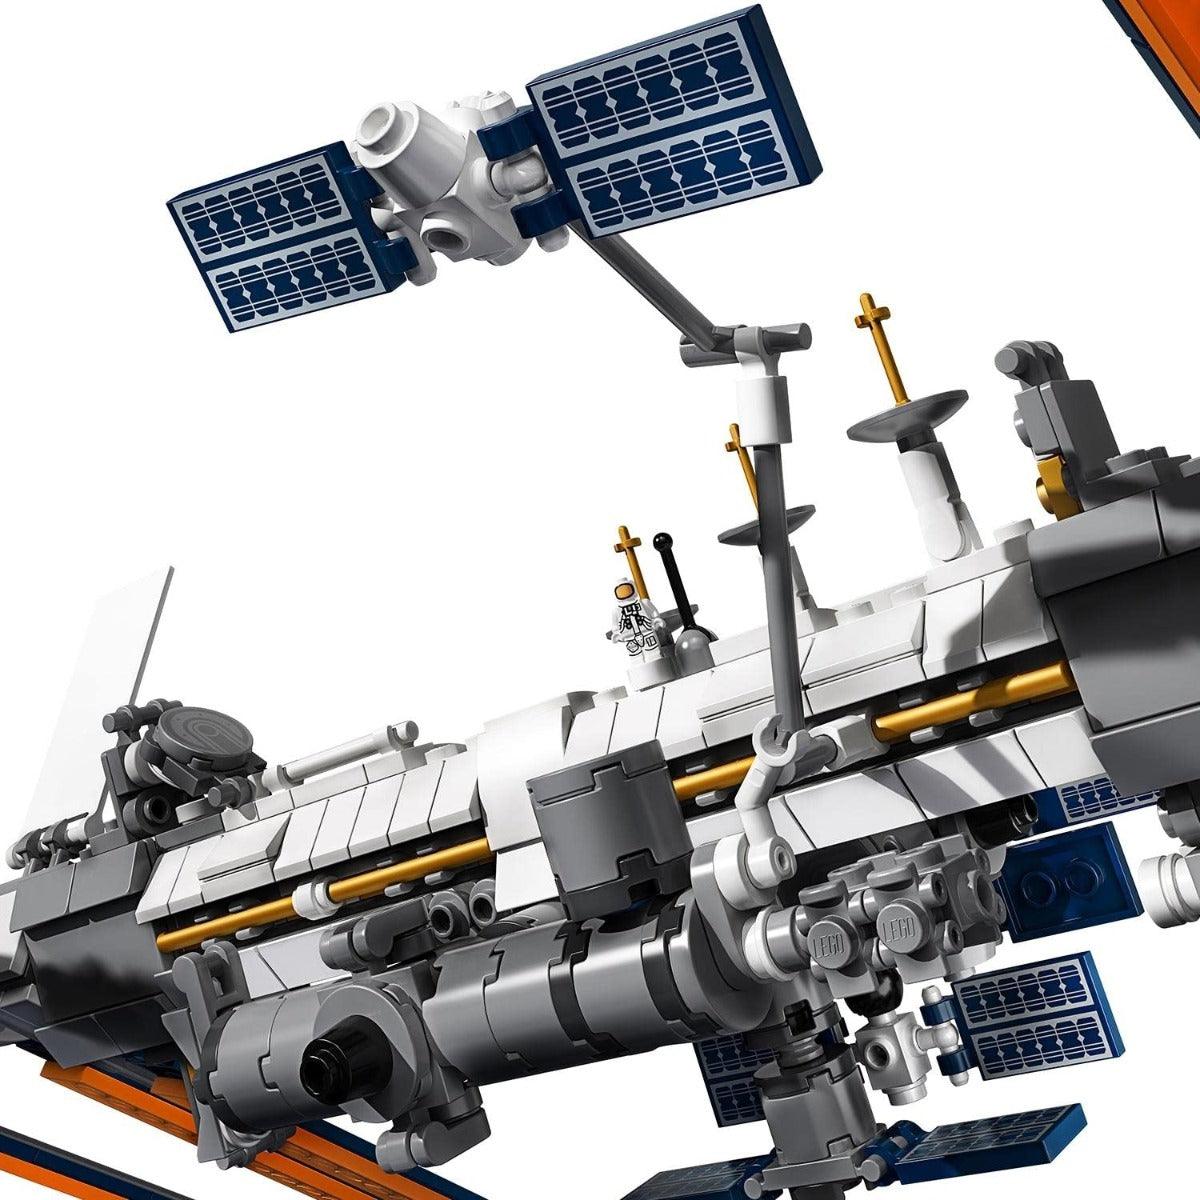 Lego Ideas International Space Station Building Kit For Ages 16+